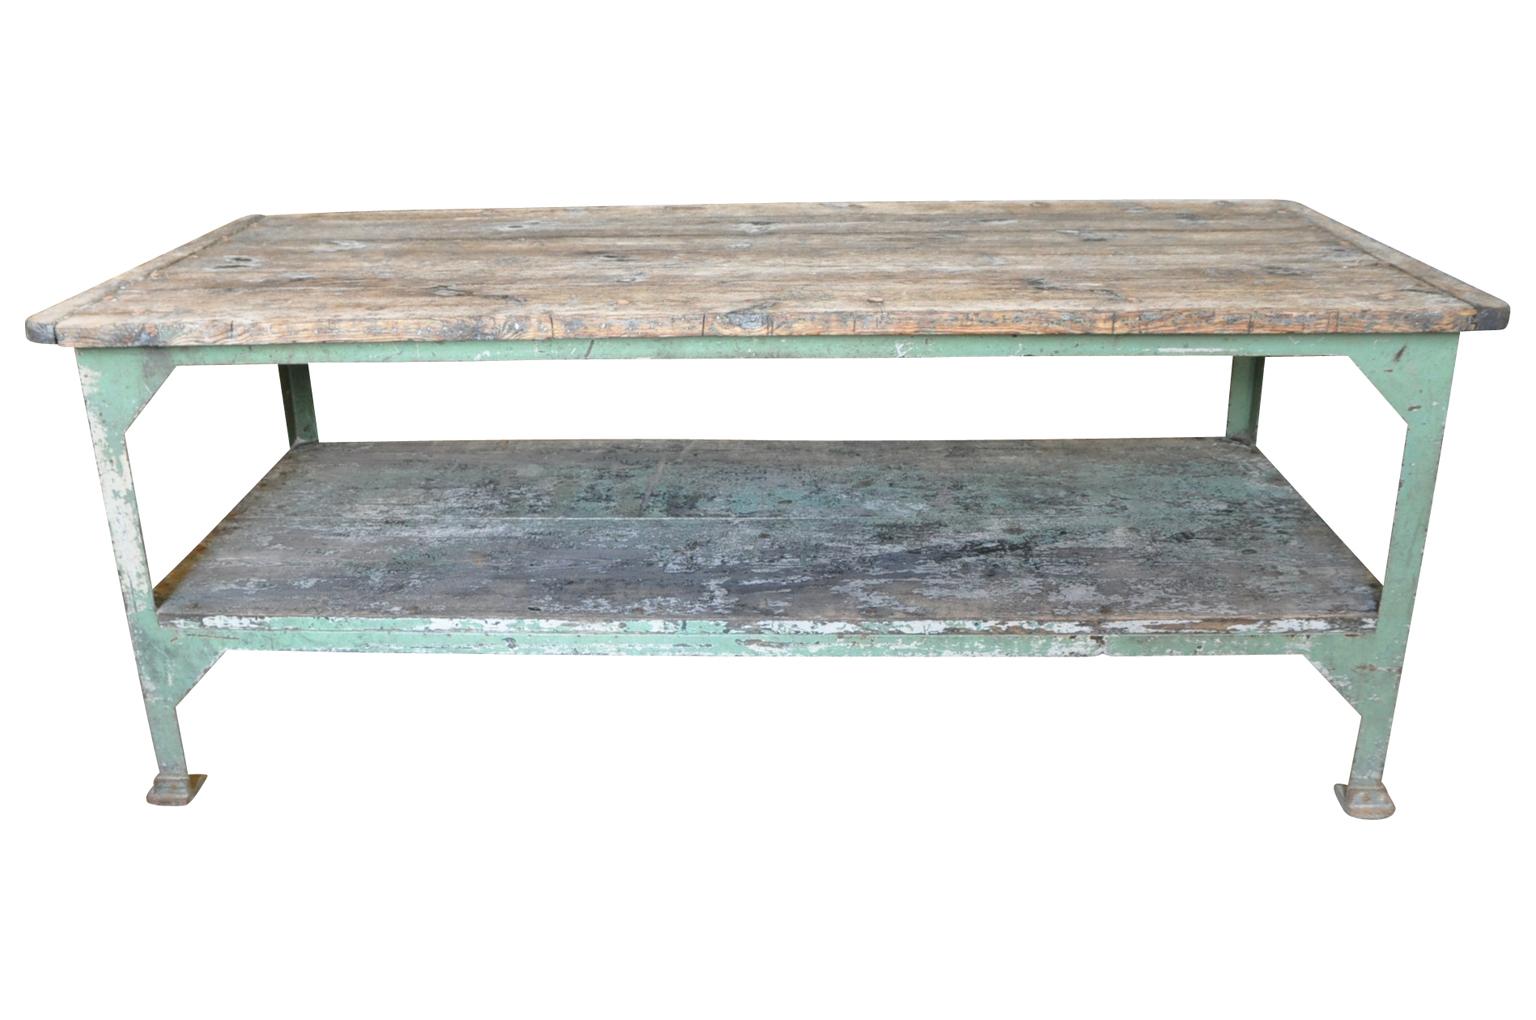 A terrific early 20th century French work table, Draper's table. Very sturdily constructed from painted iron with a wooden top and shelve. Not only great as a work space, but will be fabulous as a kitchen island as well.